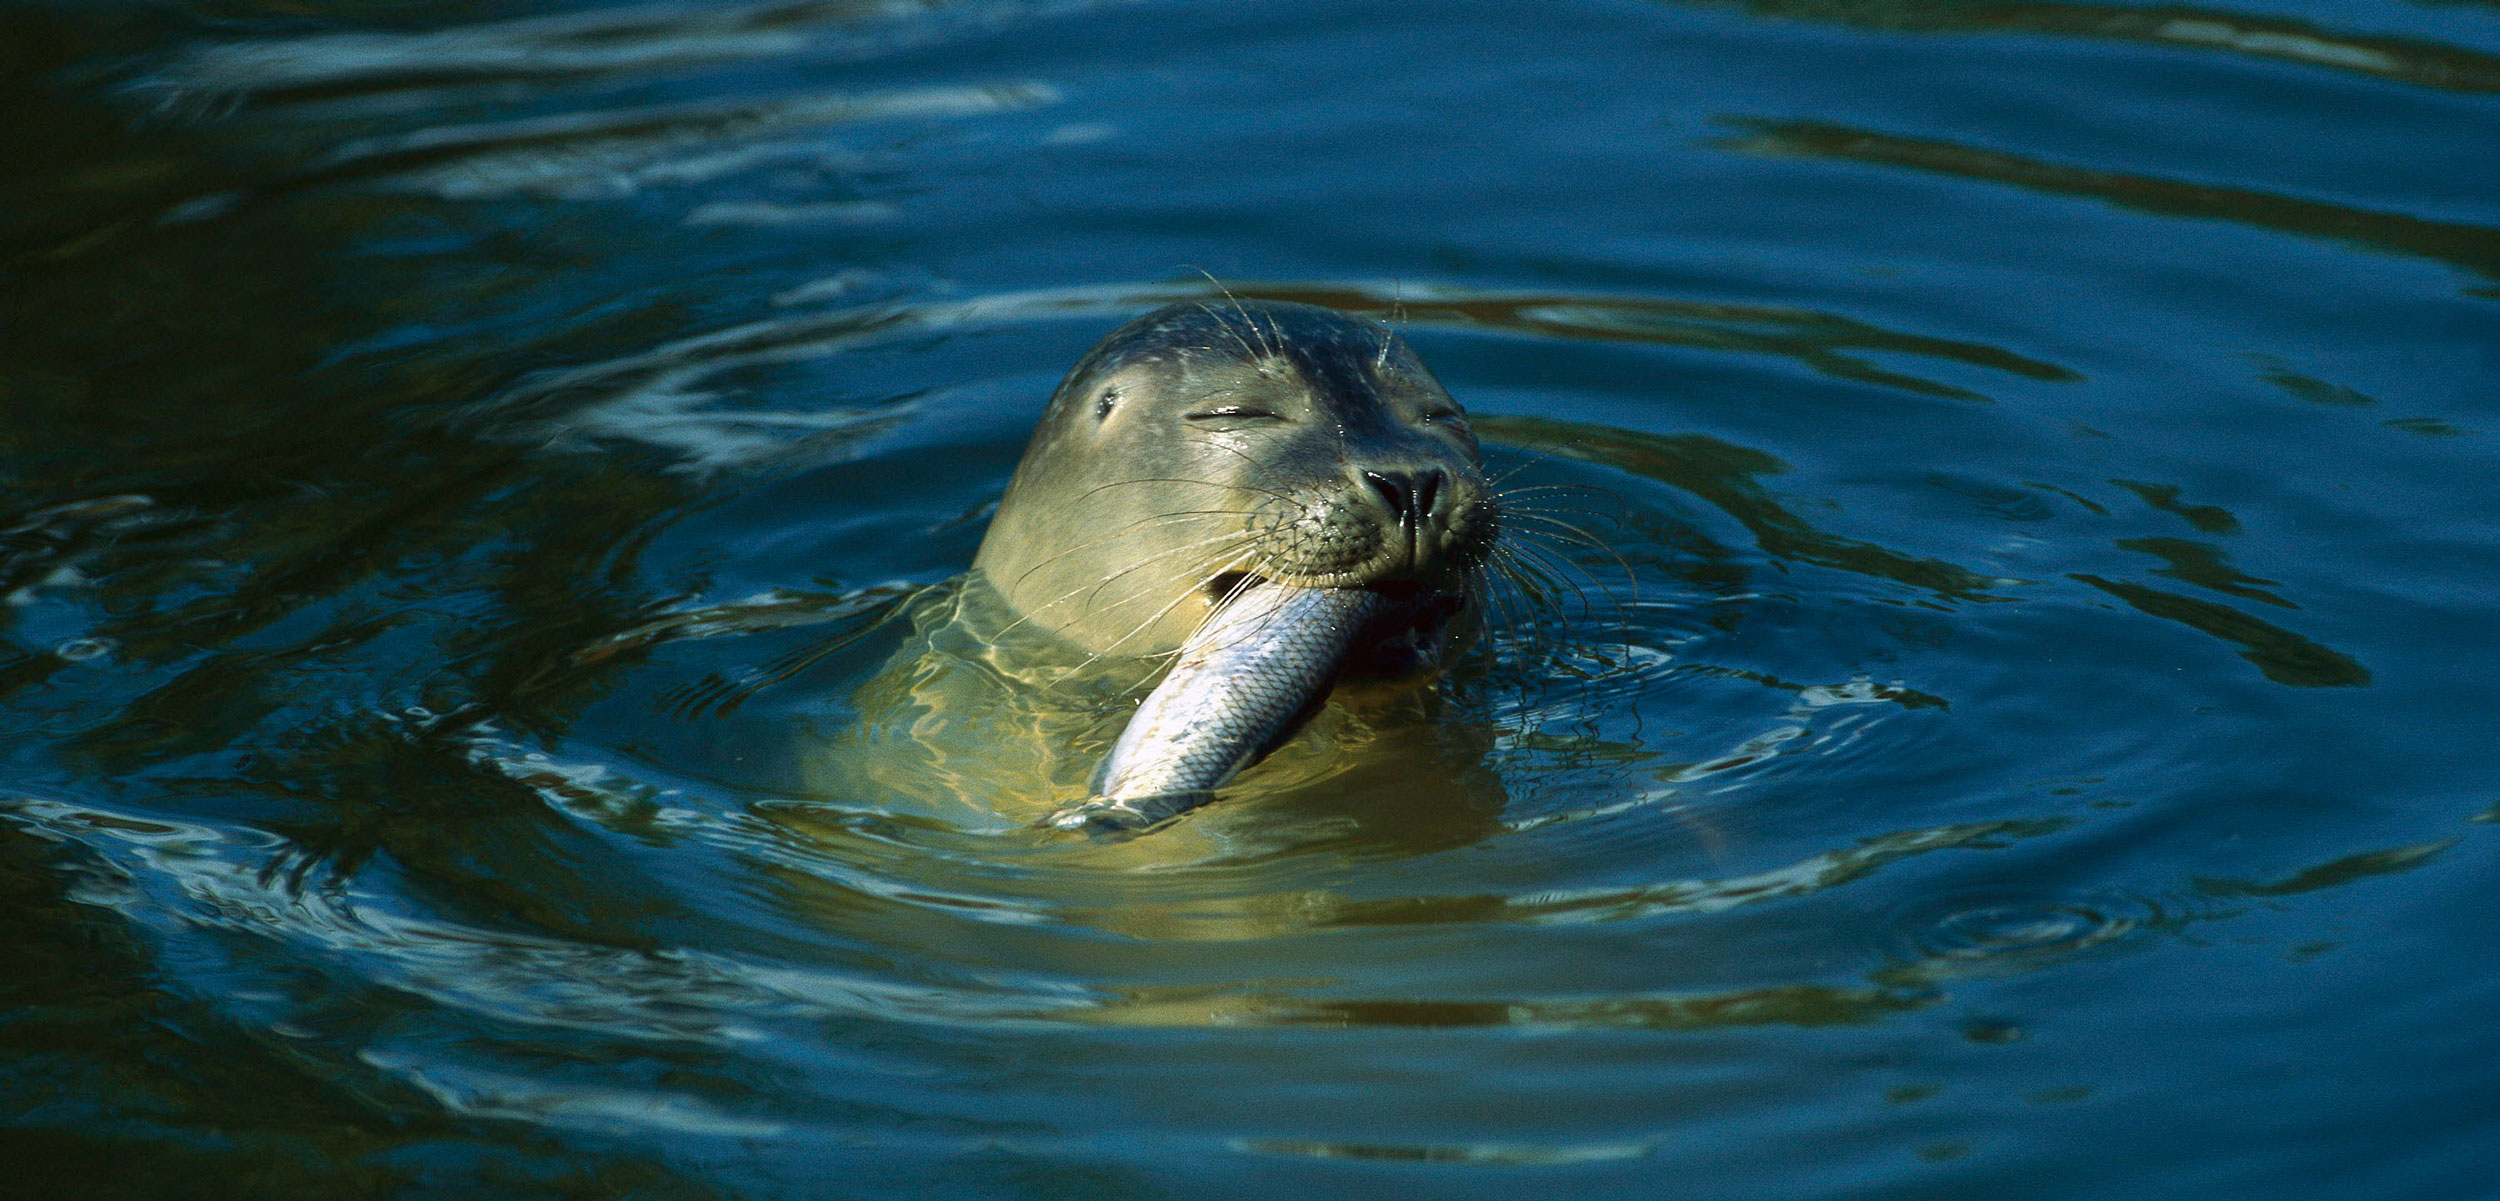 Harbor Seal (Phoca vitulina) at ocean's surface with a fish in its mouth